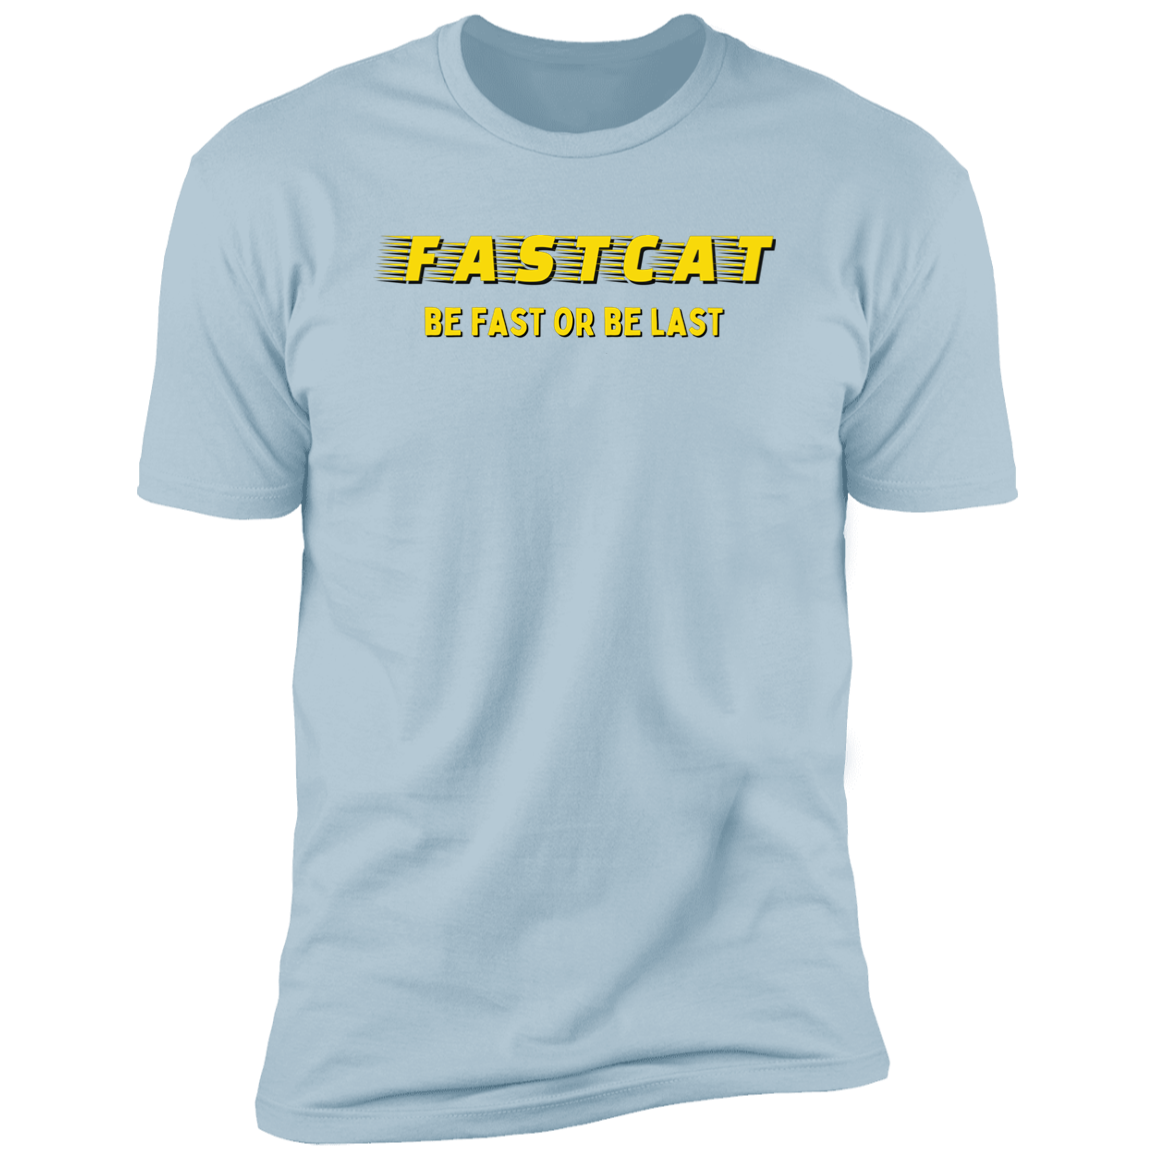 FastCAT Be Fast or Be Last Dog Sport T-shirt, FastCAT Shirt for humans, in light blue